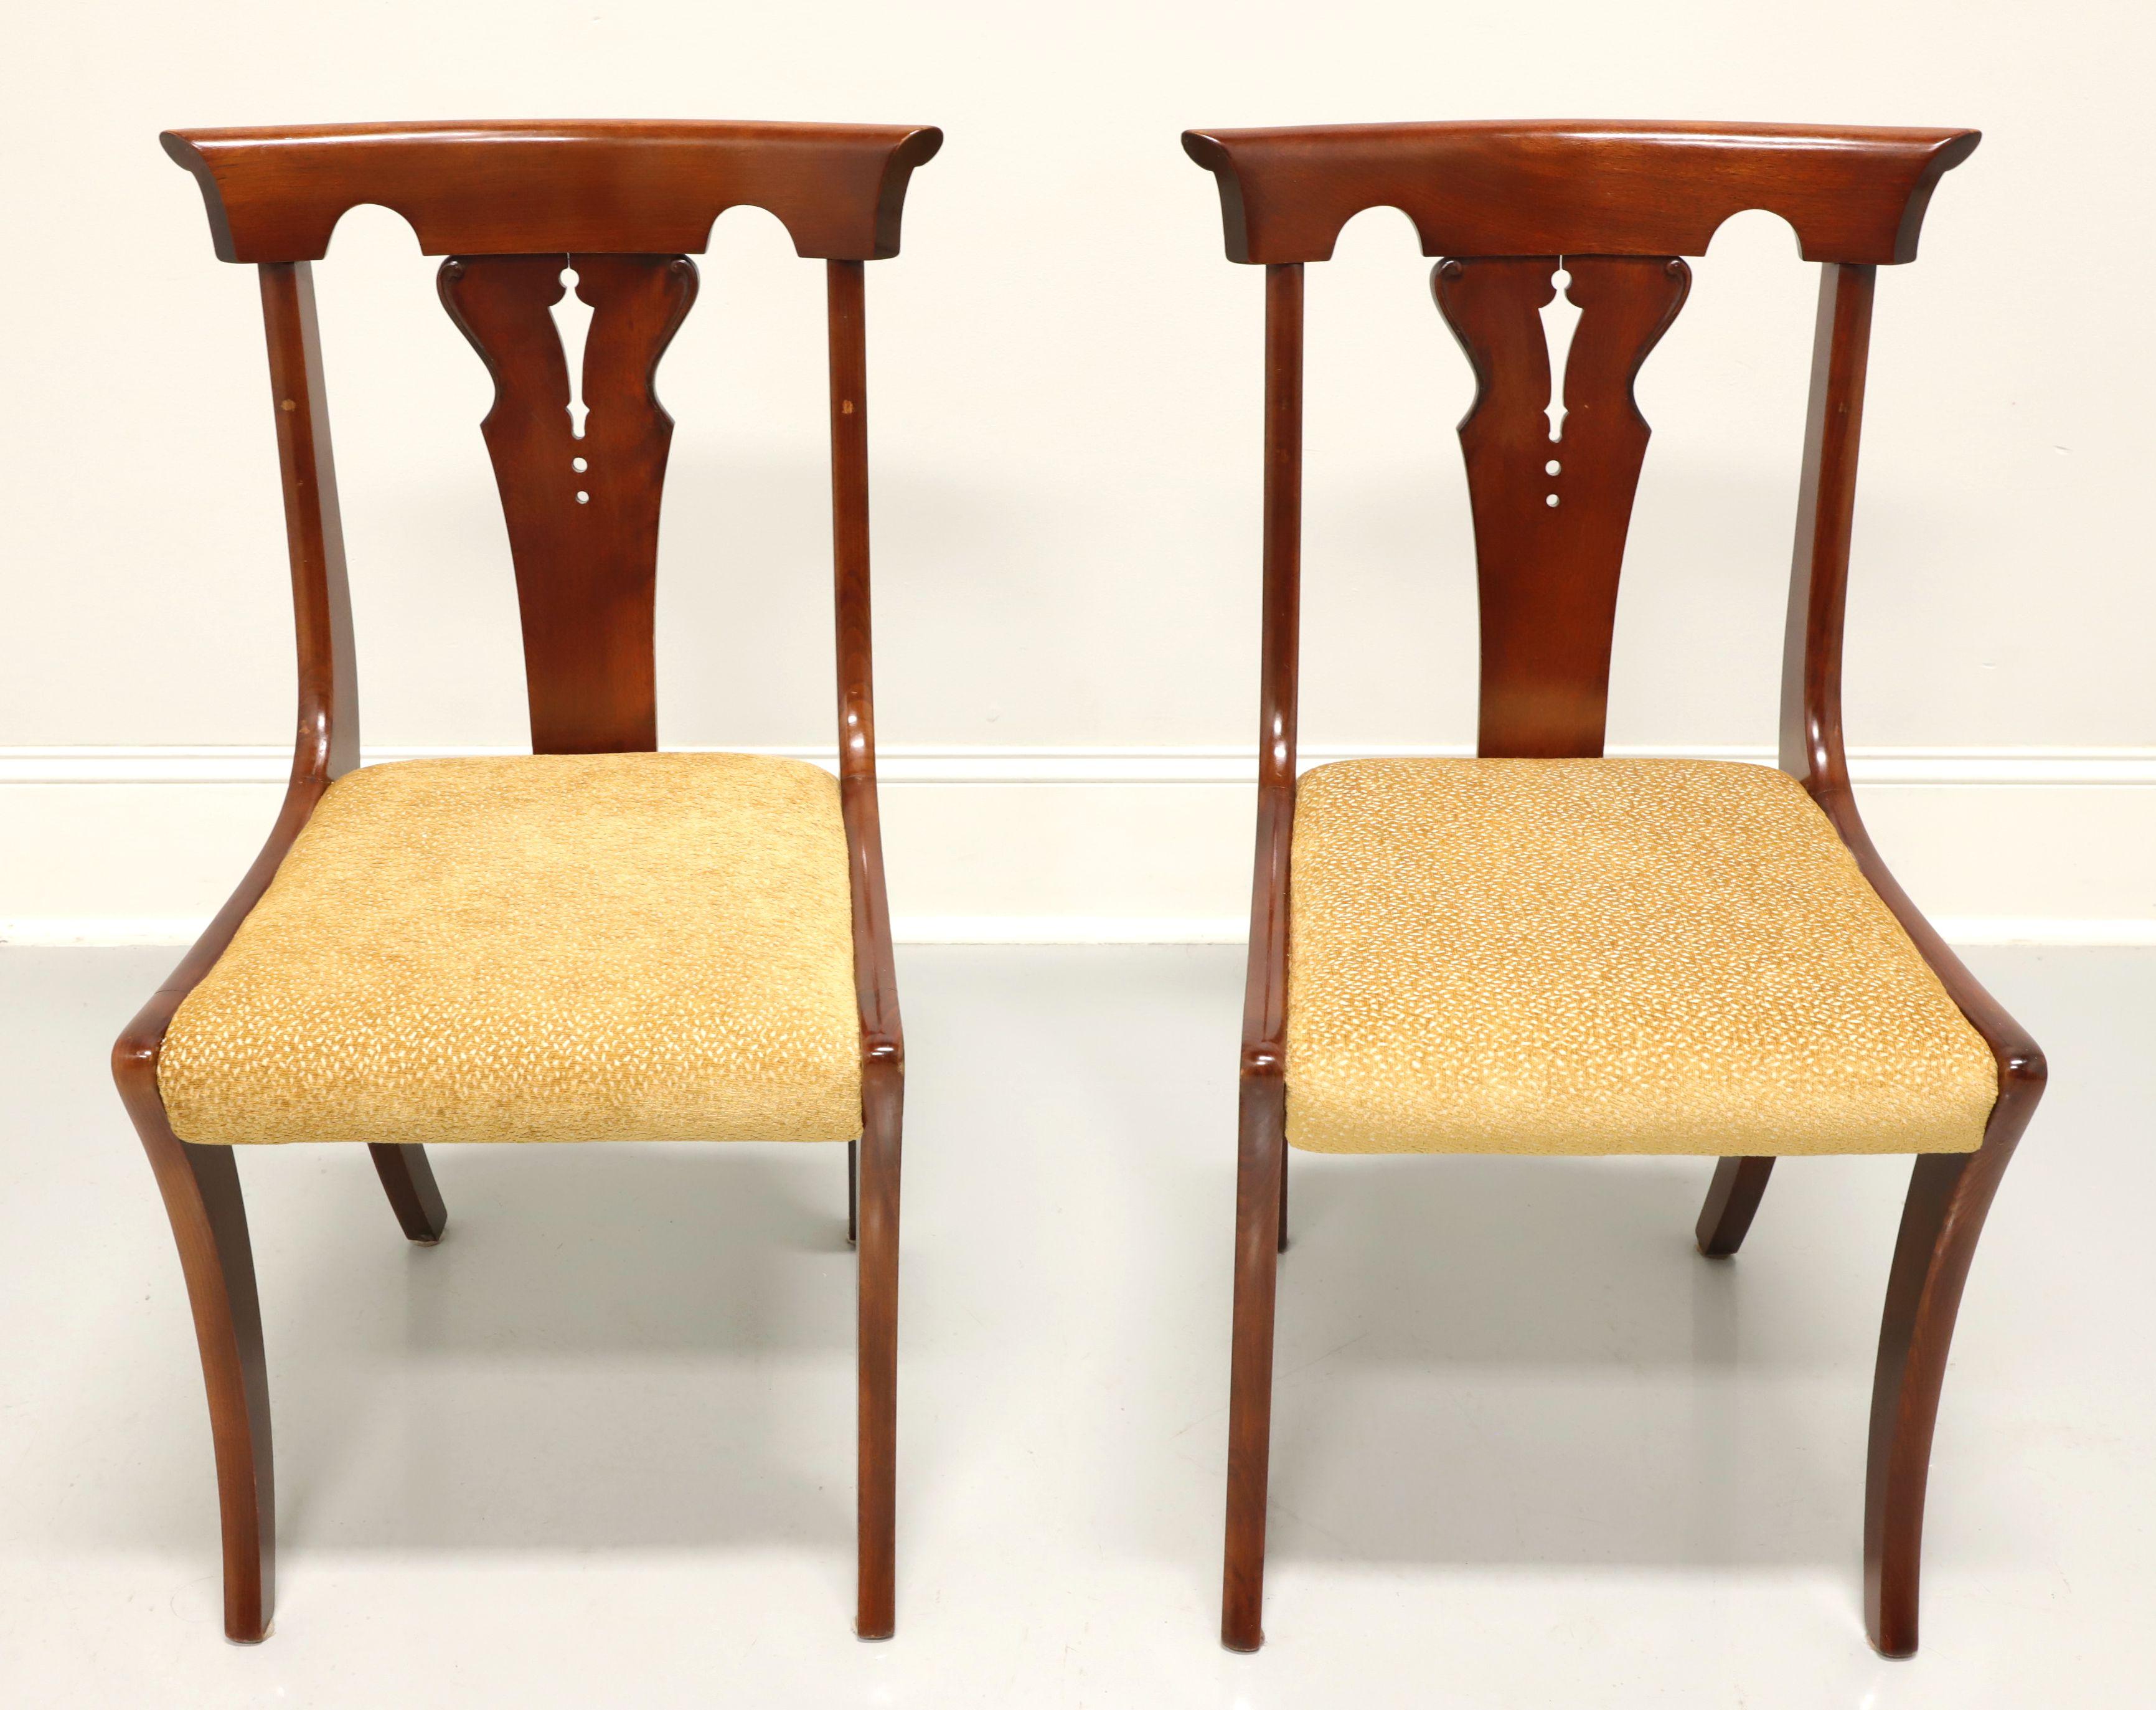 A pair of dining side chairs in the Empire style, unbranded. Solid cherry with carved barback crest rail, carved backrest, upholstered seat in a gold colored textured fabric and gently curved legs with rear stretcher.  Made in USA, in the mid 20th